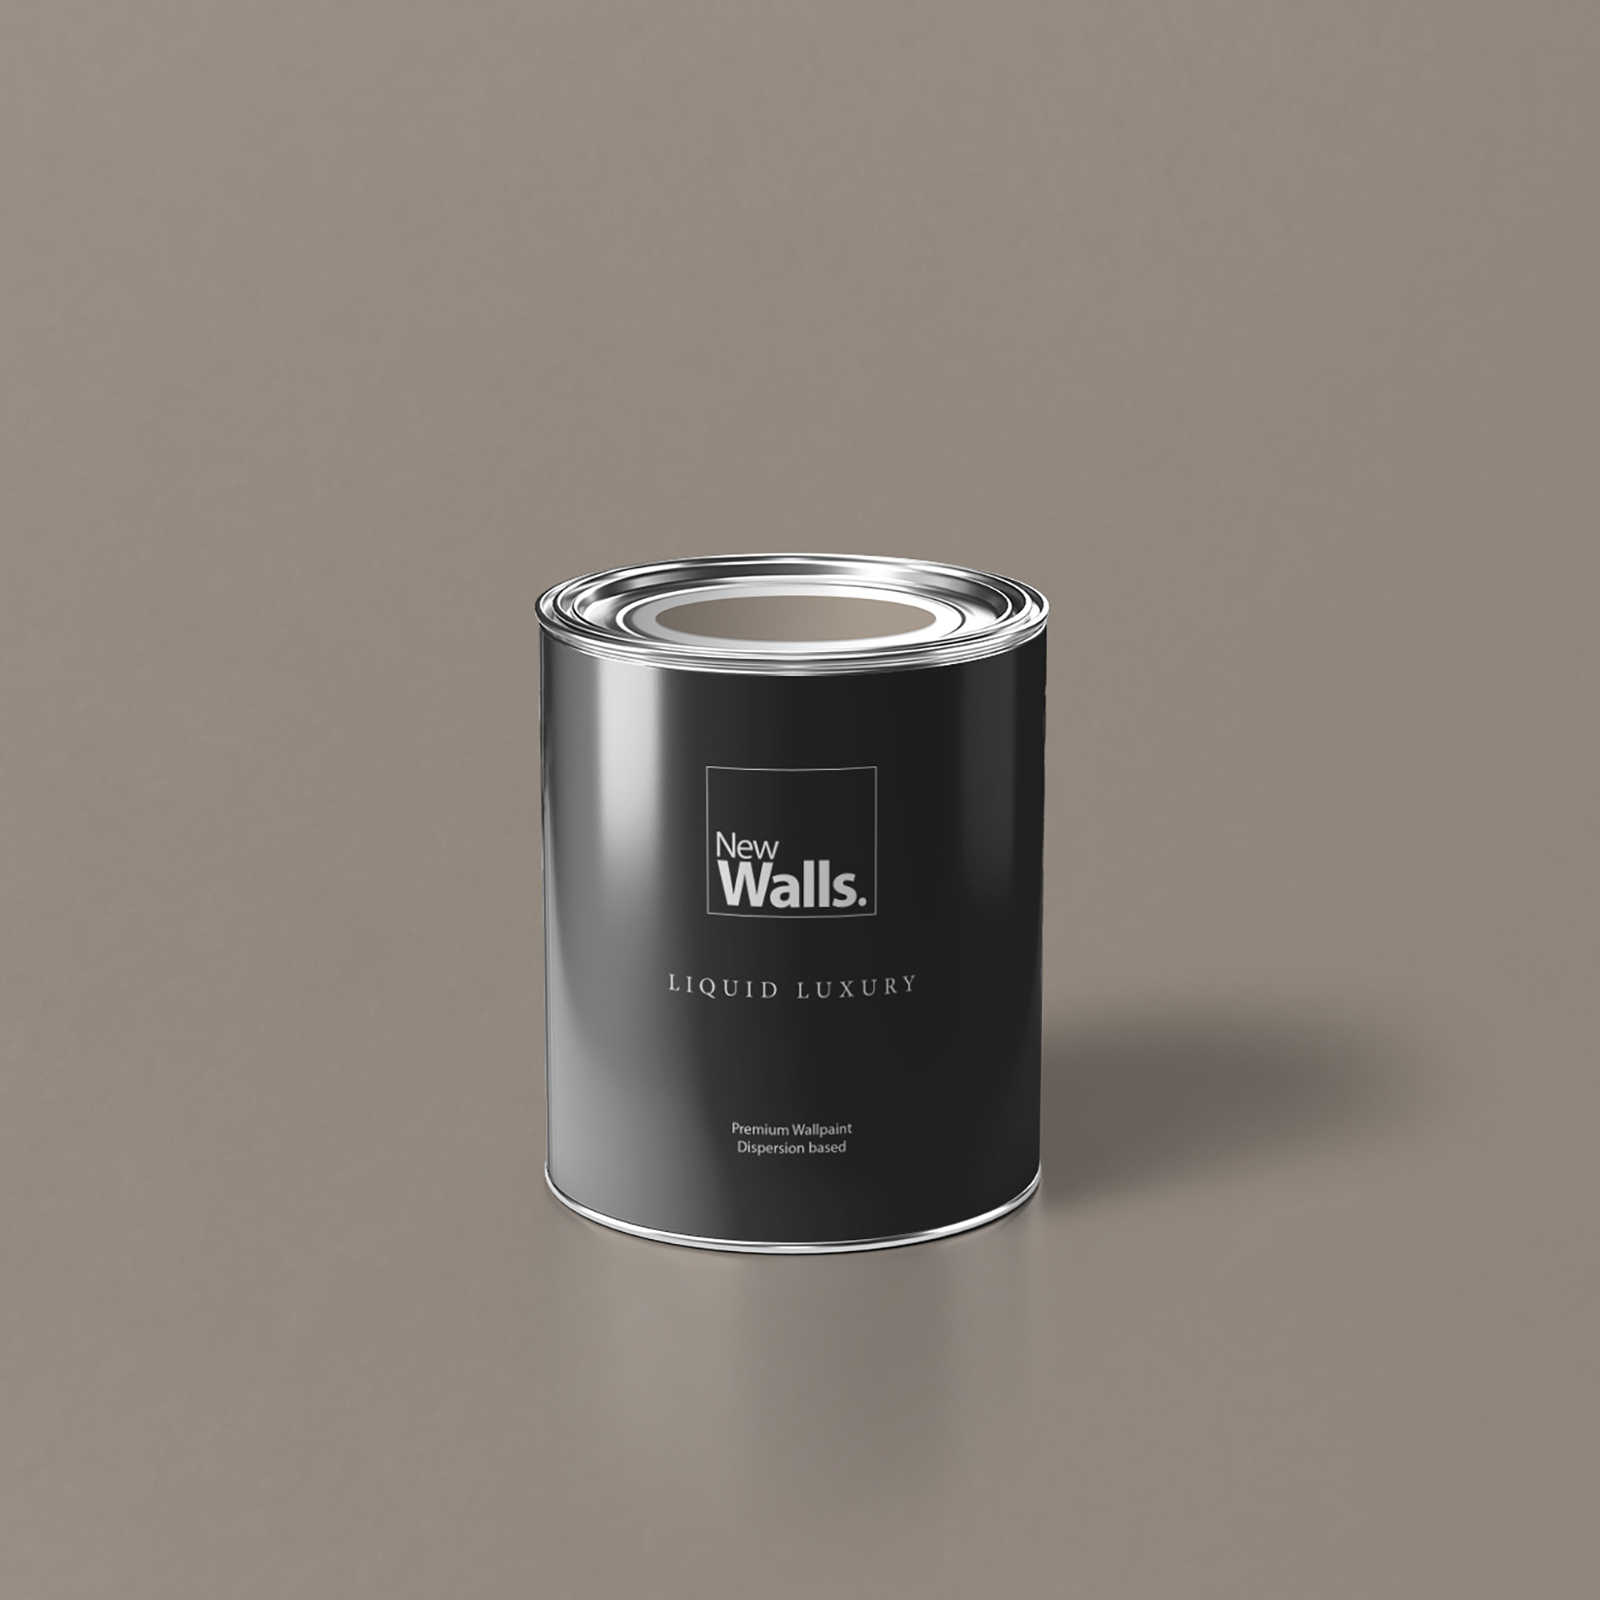         Premium Wall Paint Balanced Taupe »Talented calm taupe« NW701 – 1 litre
    